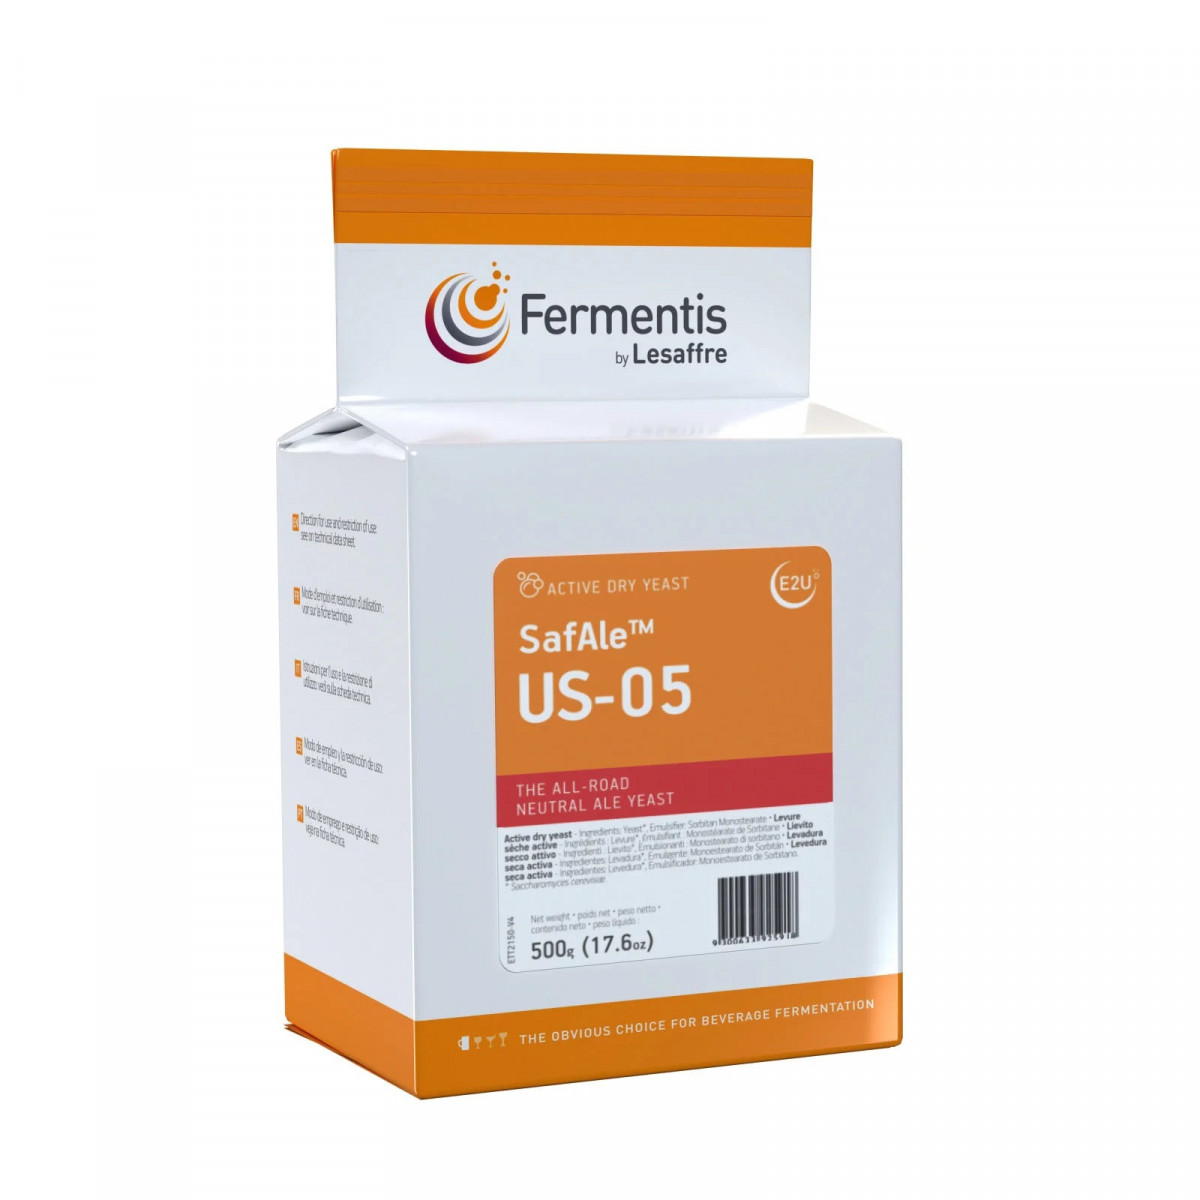 Fermentis dried brewing yeast SafAle US-05 500 g